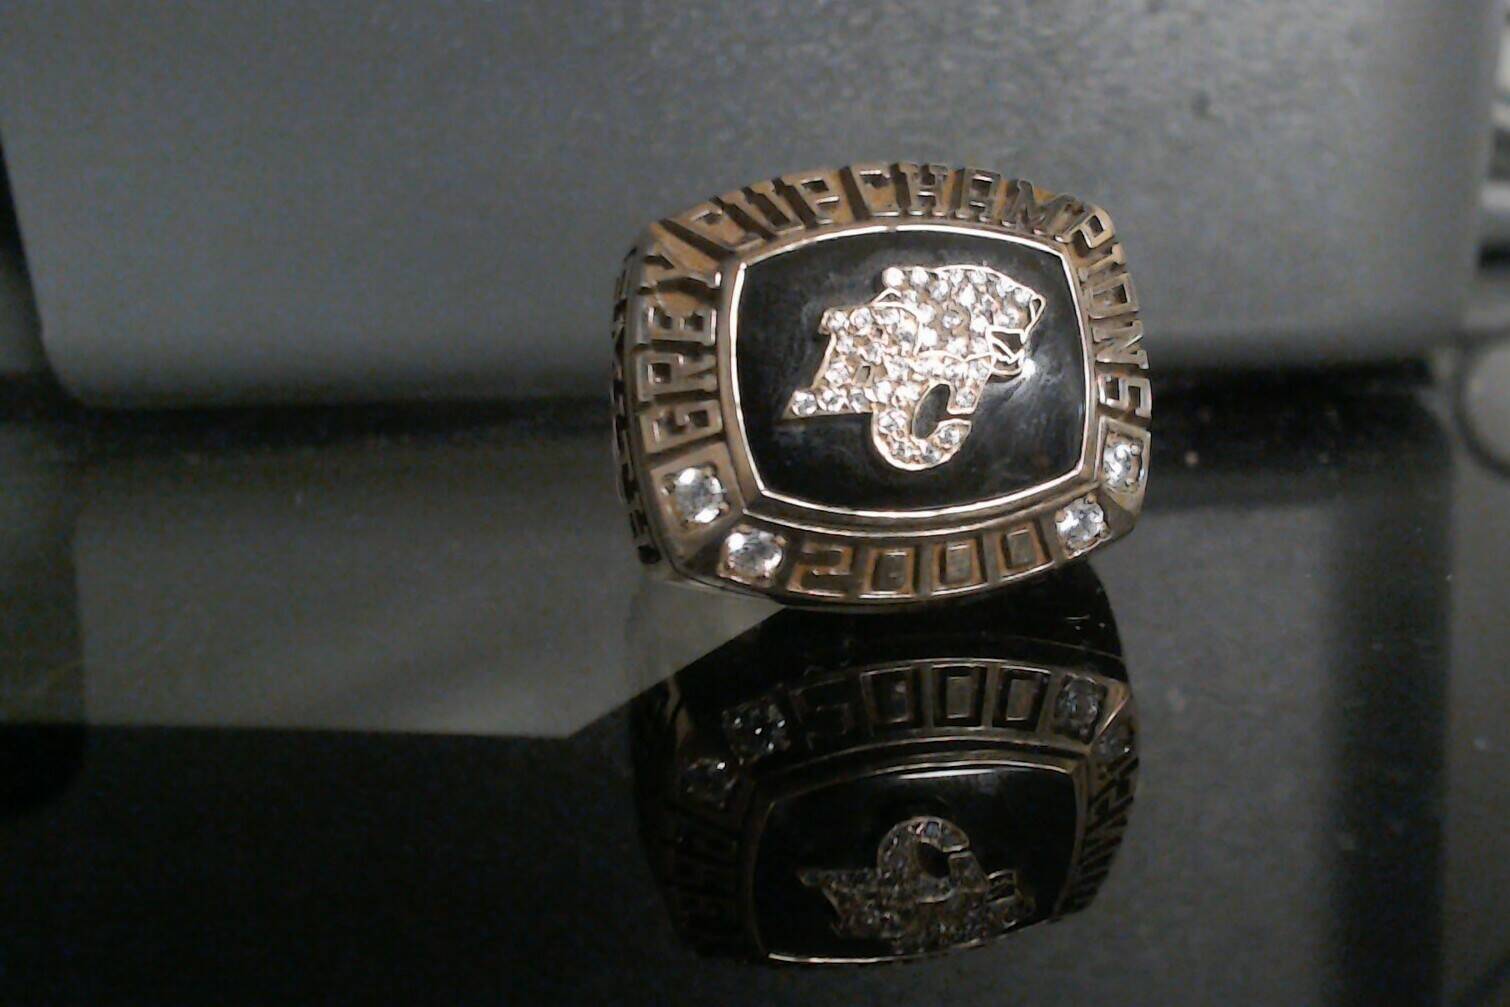 Former B.C. Lion Herman Smith is poised to be reunited with this ring he lost more than 20 years ago. (courtesy Bob Marjanovich)